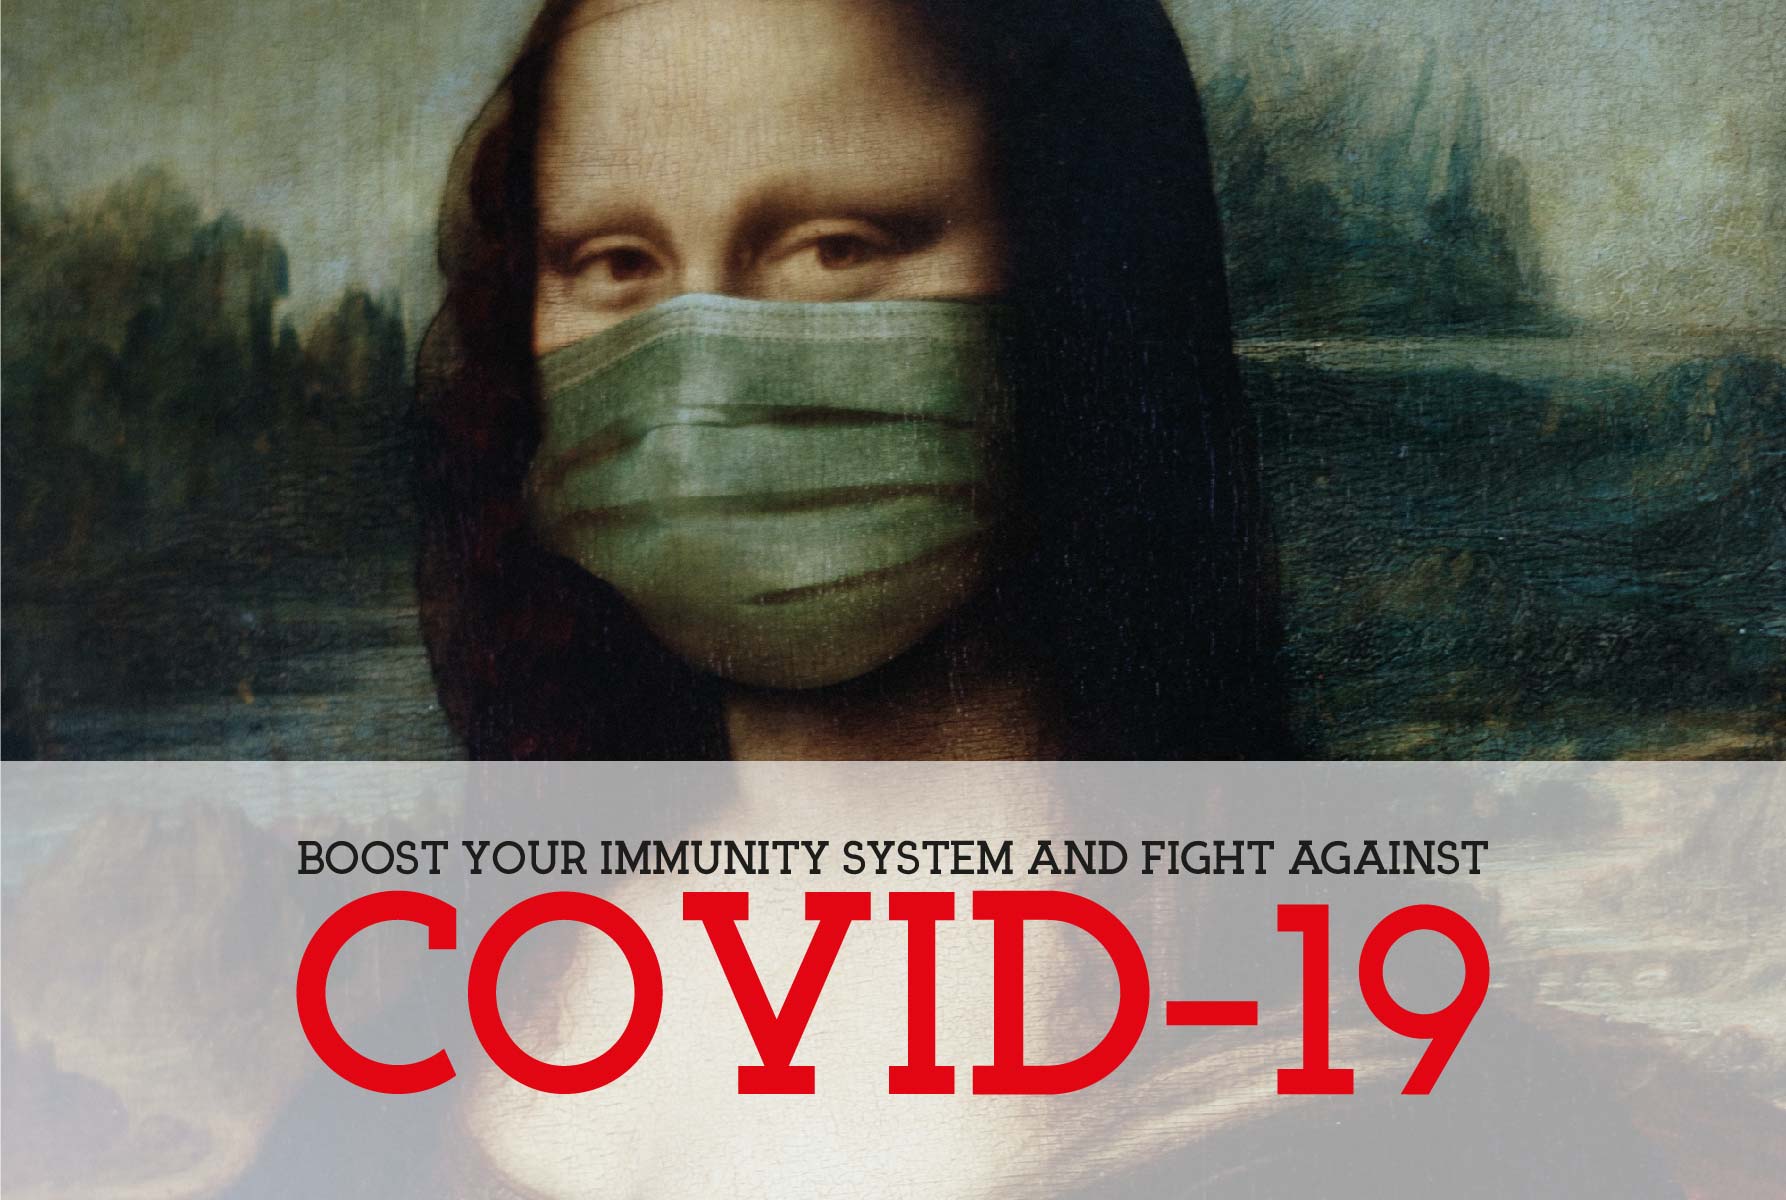 Boost your immunity system and fight against Covid!